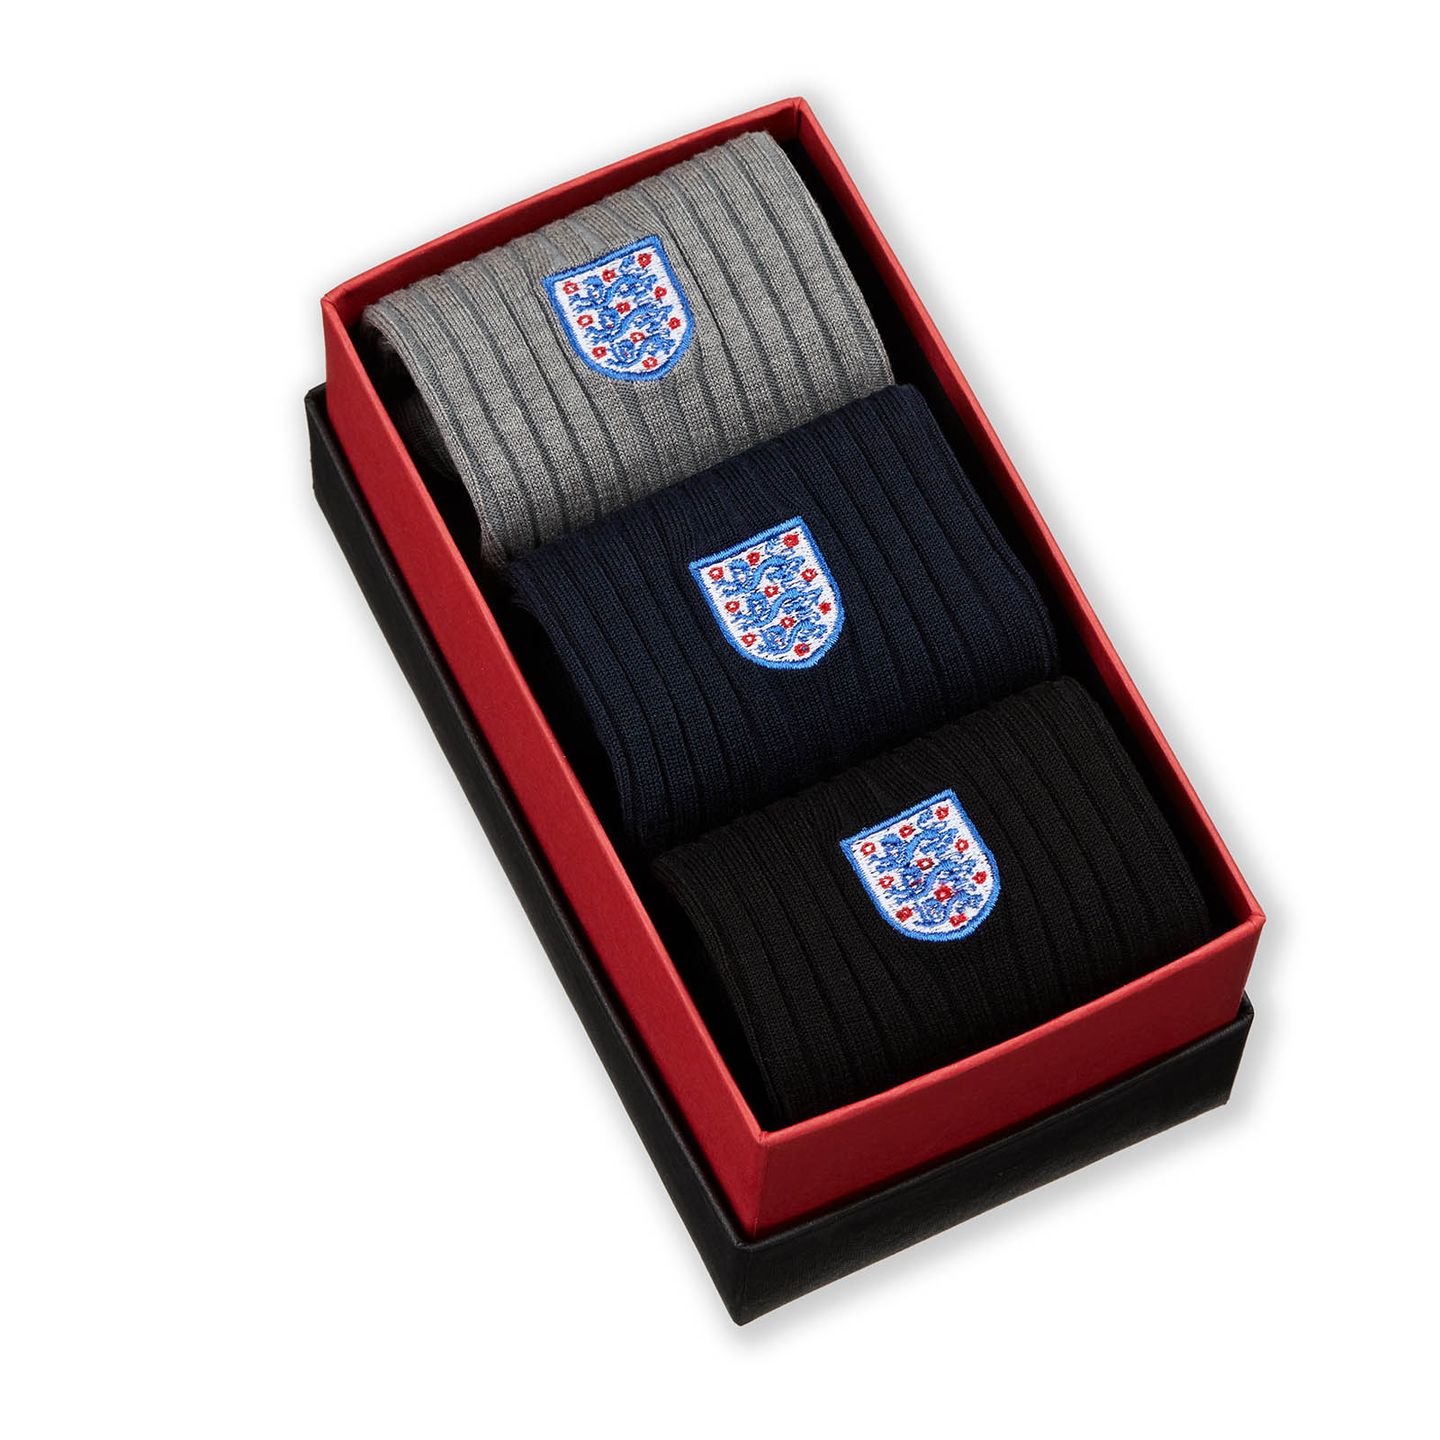 3 pair of different colour England socks in a box